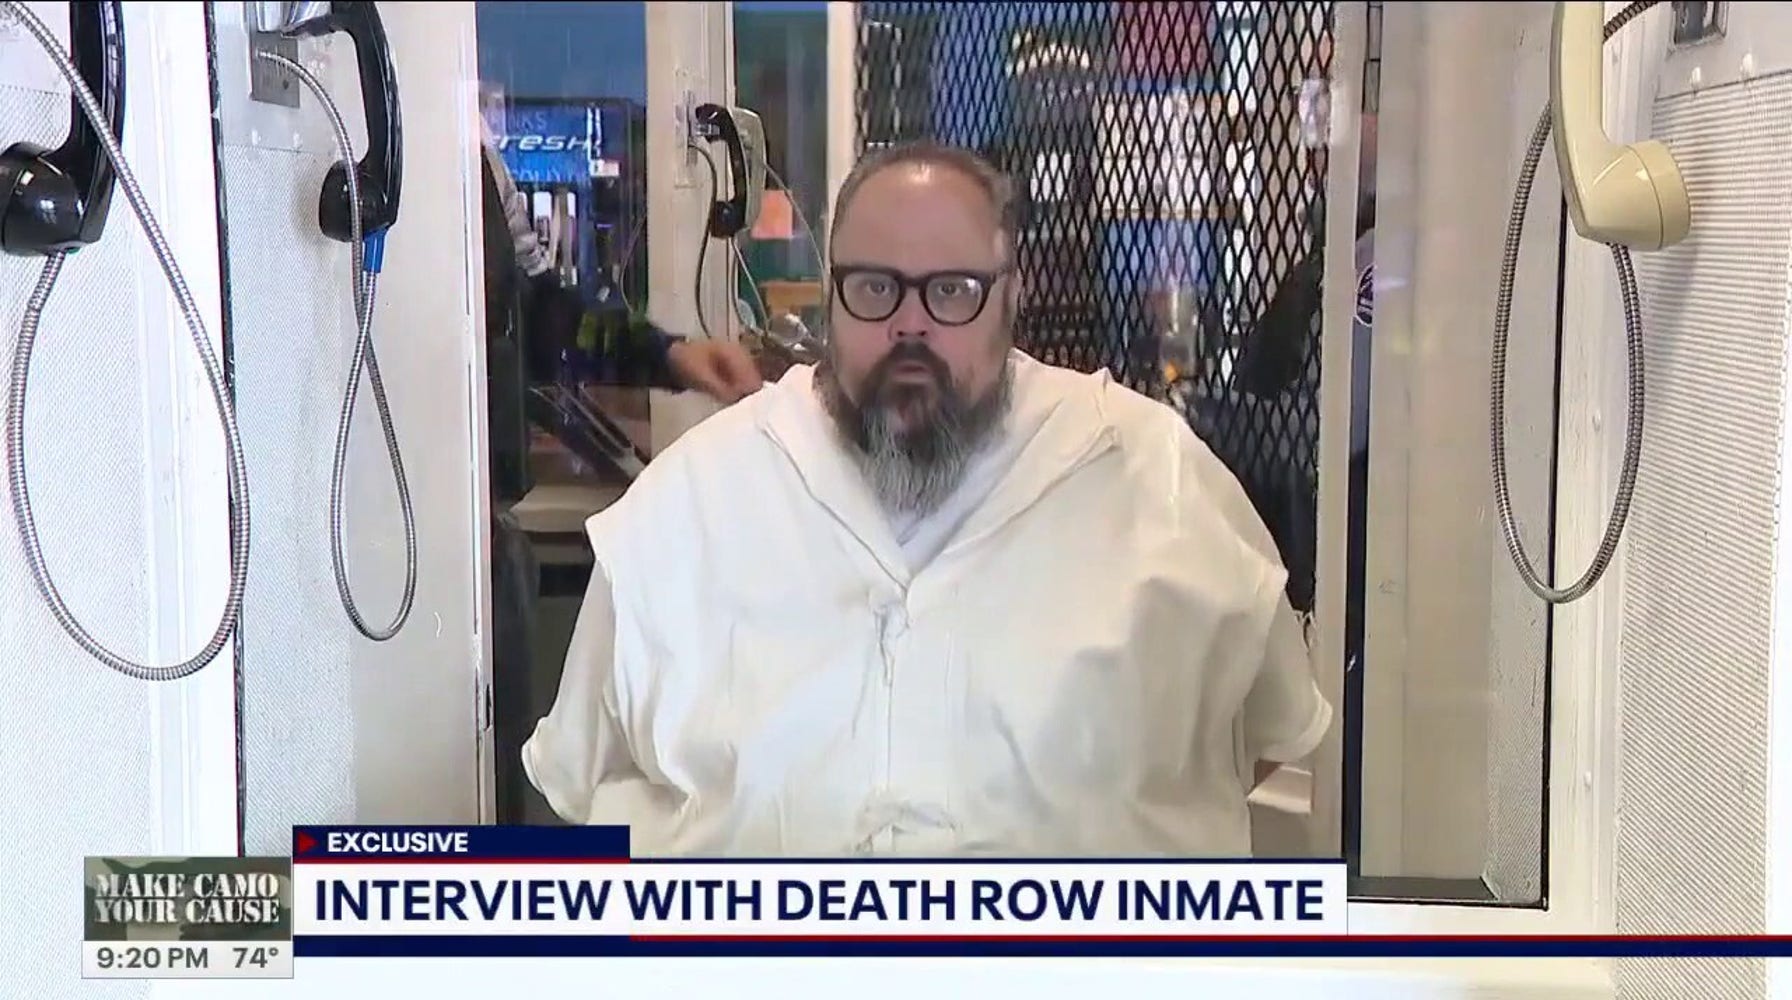 Texas Death Row Inmate Apologizes to Victim's Family Before Execution